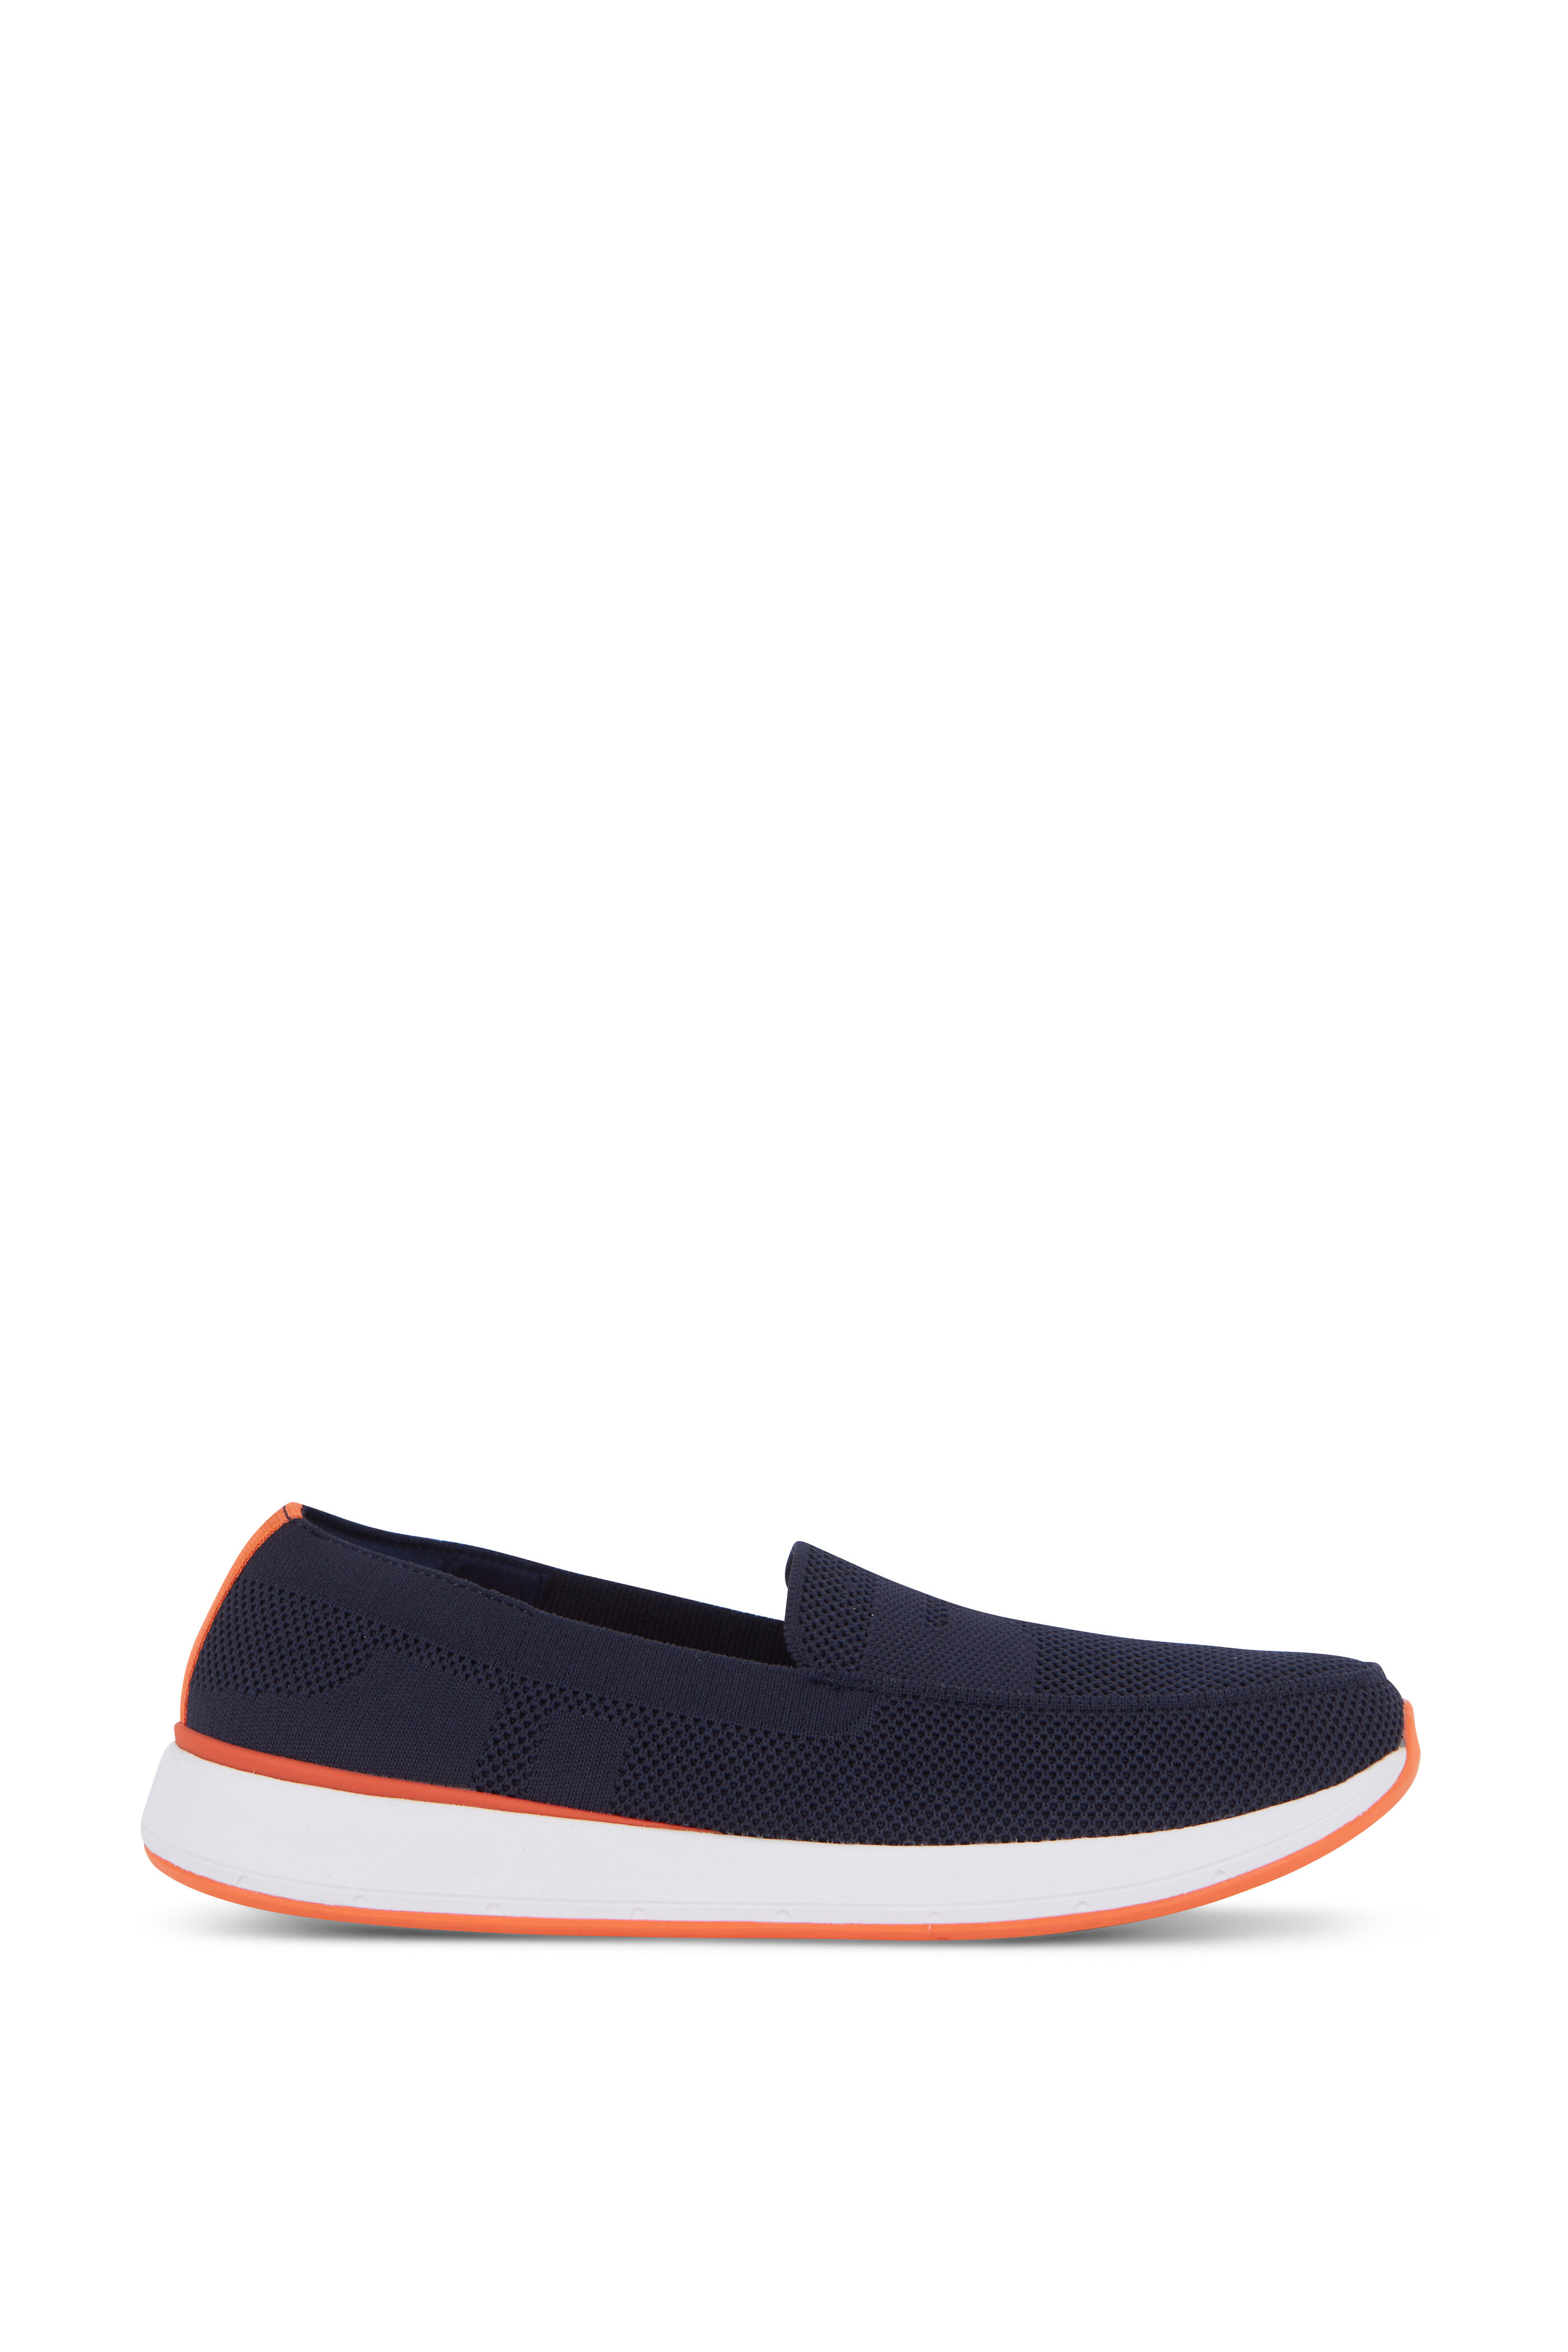 Women's Riva Loafer in Navy for Womens, SWIMS